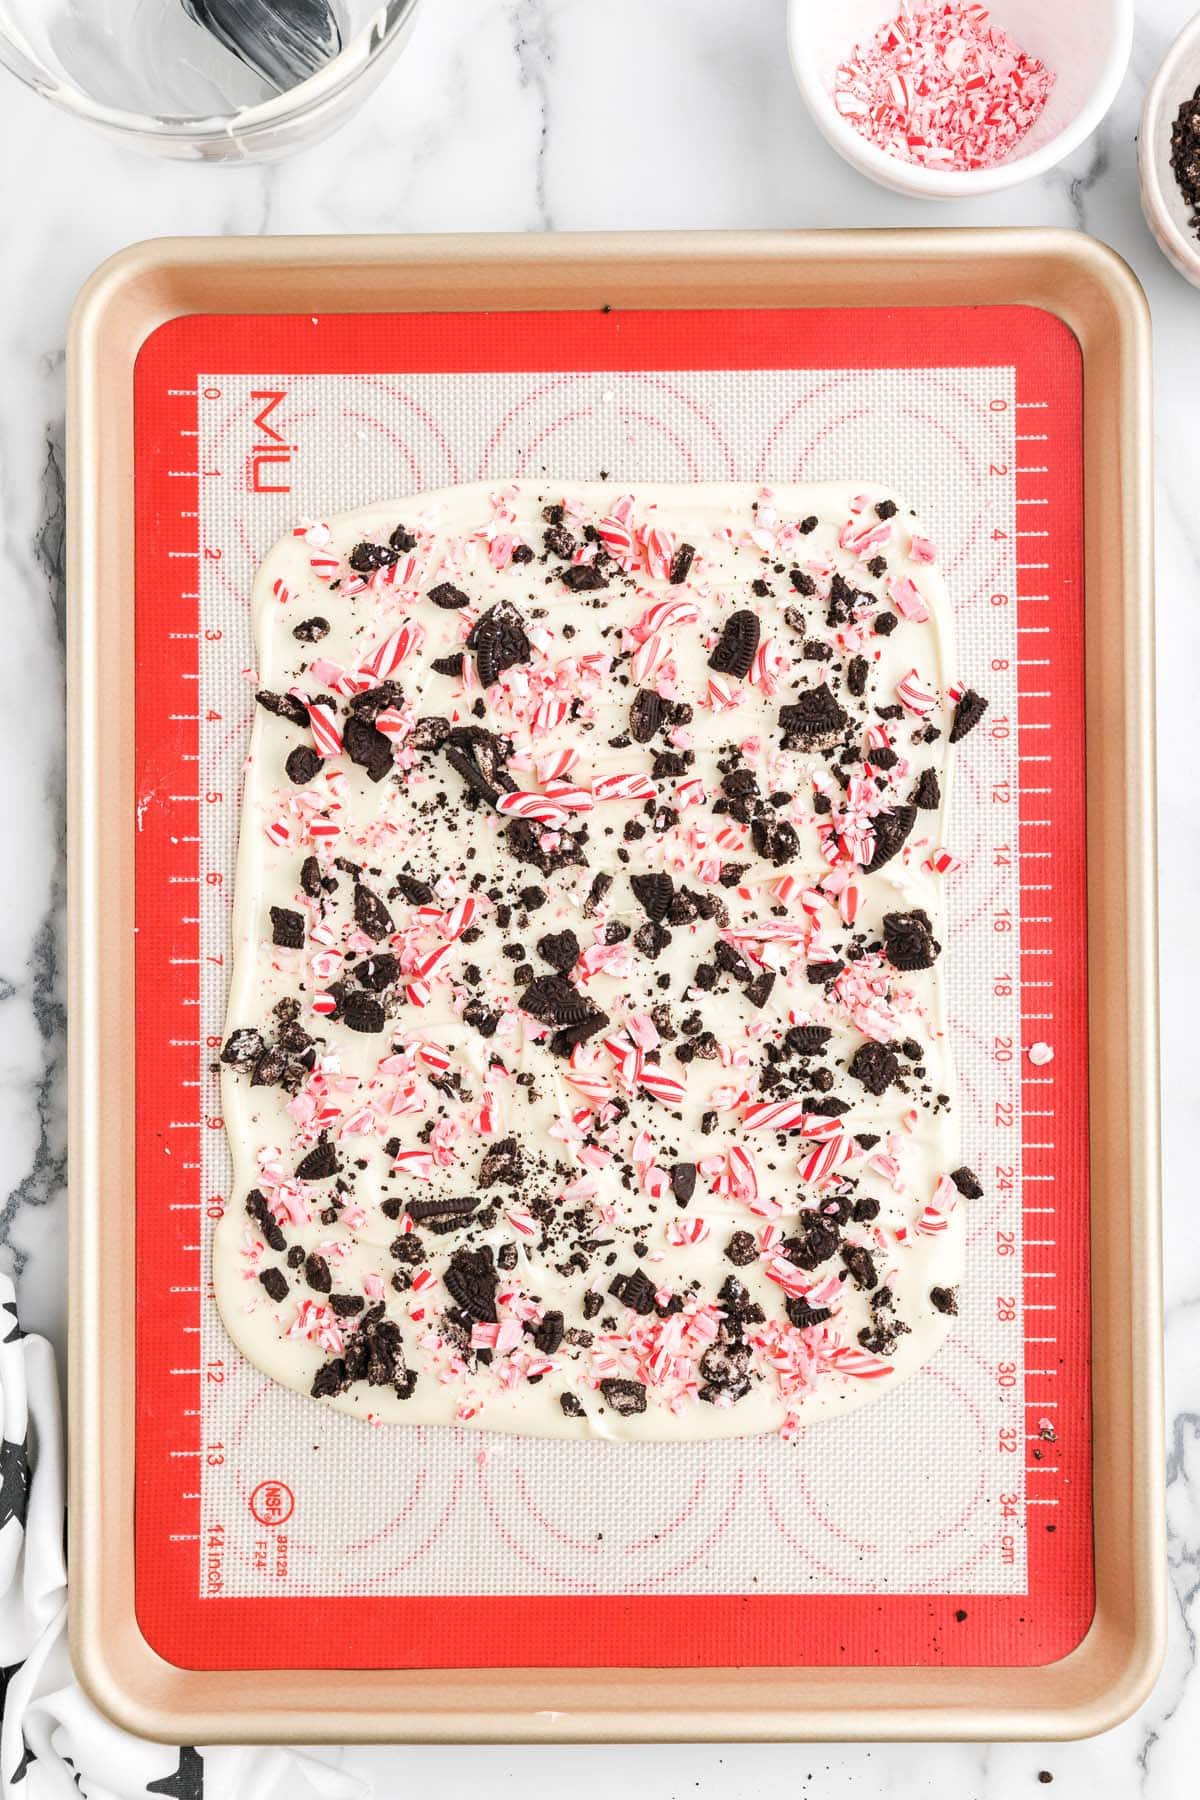 Sprinkle crushed peppermint and Oreos on the chocolate